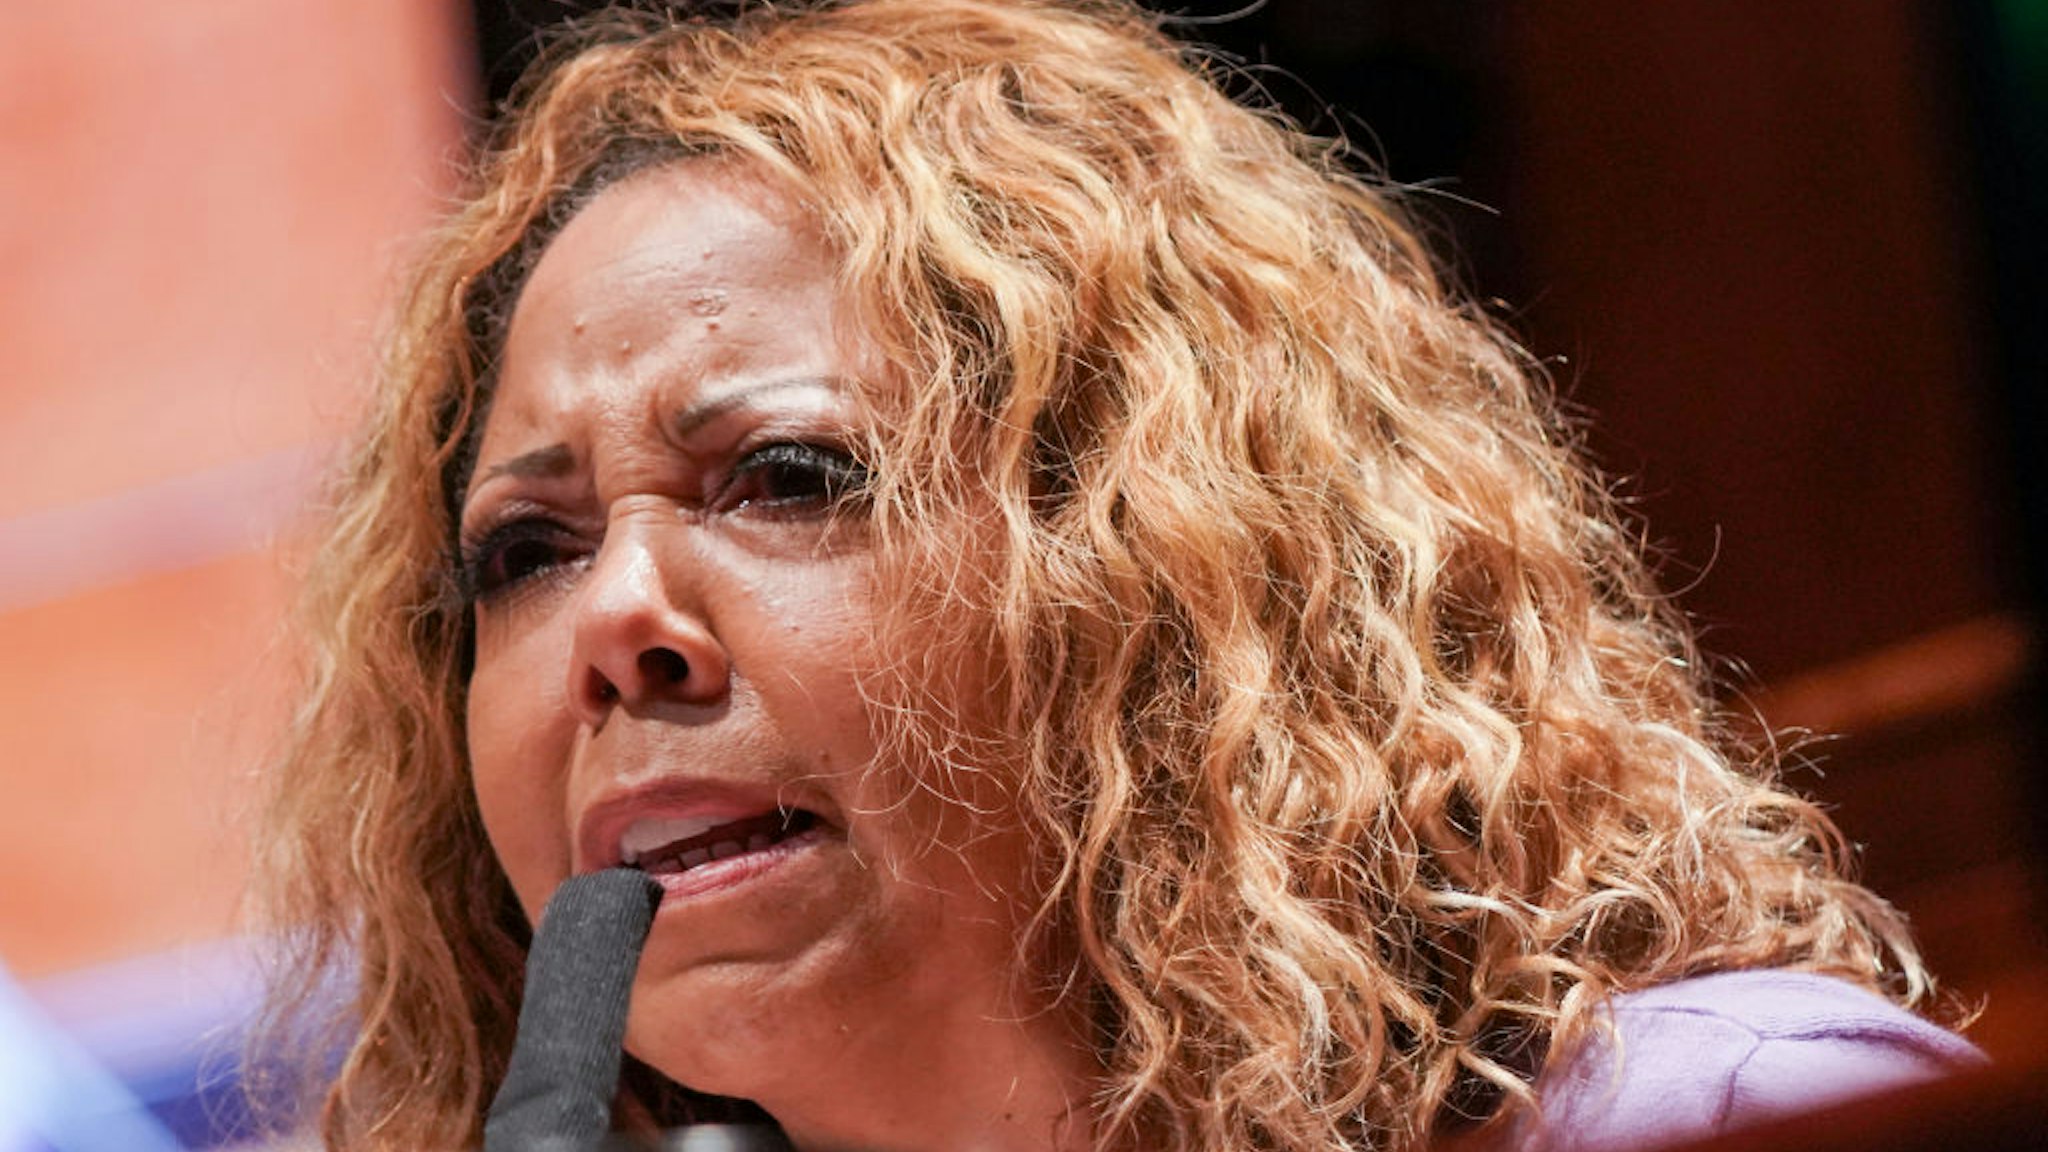 U.S. Rep. Lucy McBath (D-GA) questions witnesses a House Judiciary Committee hearing on police brutality and racial profiling on June 10, 2020 in Washington, DC.